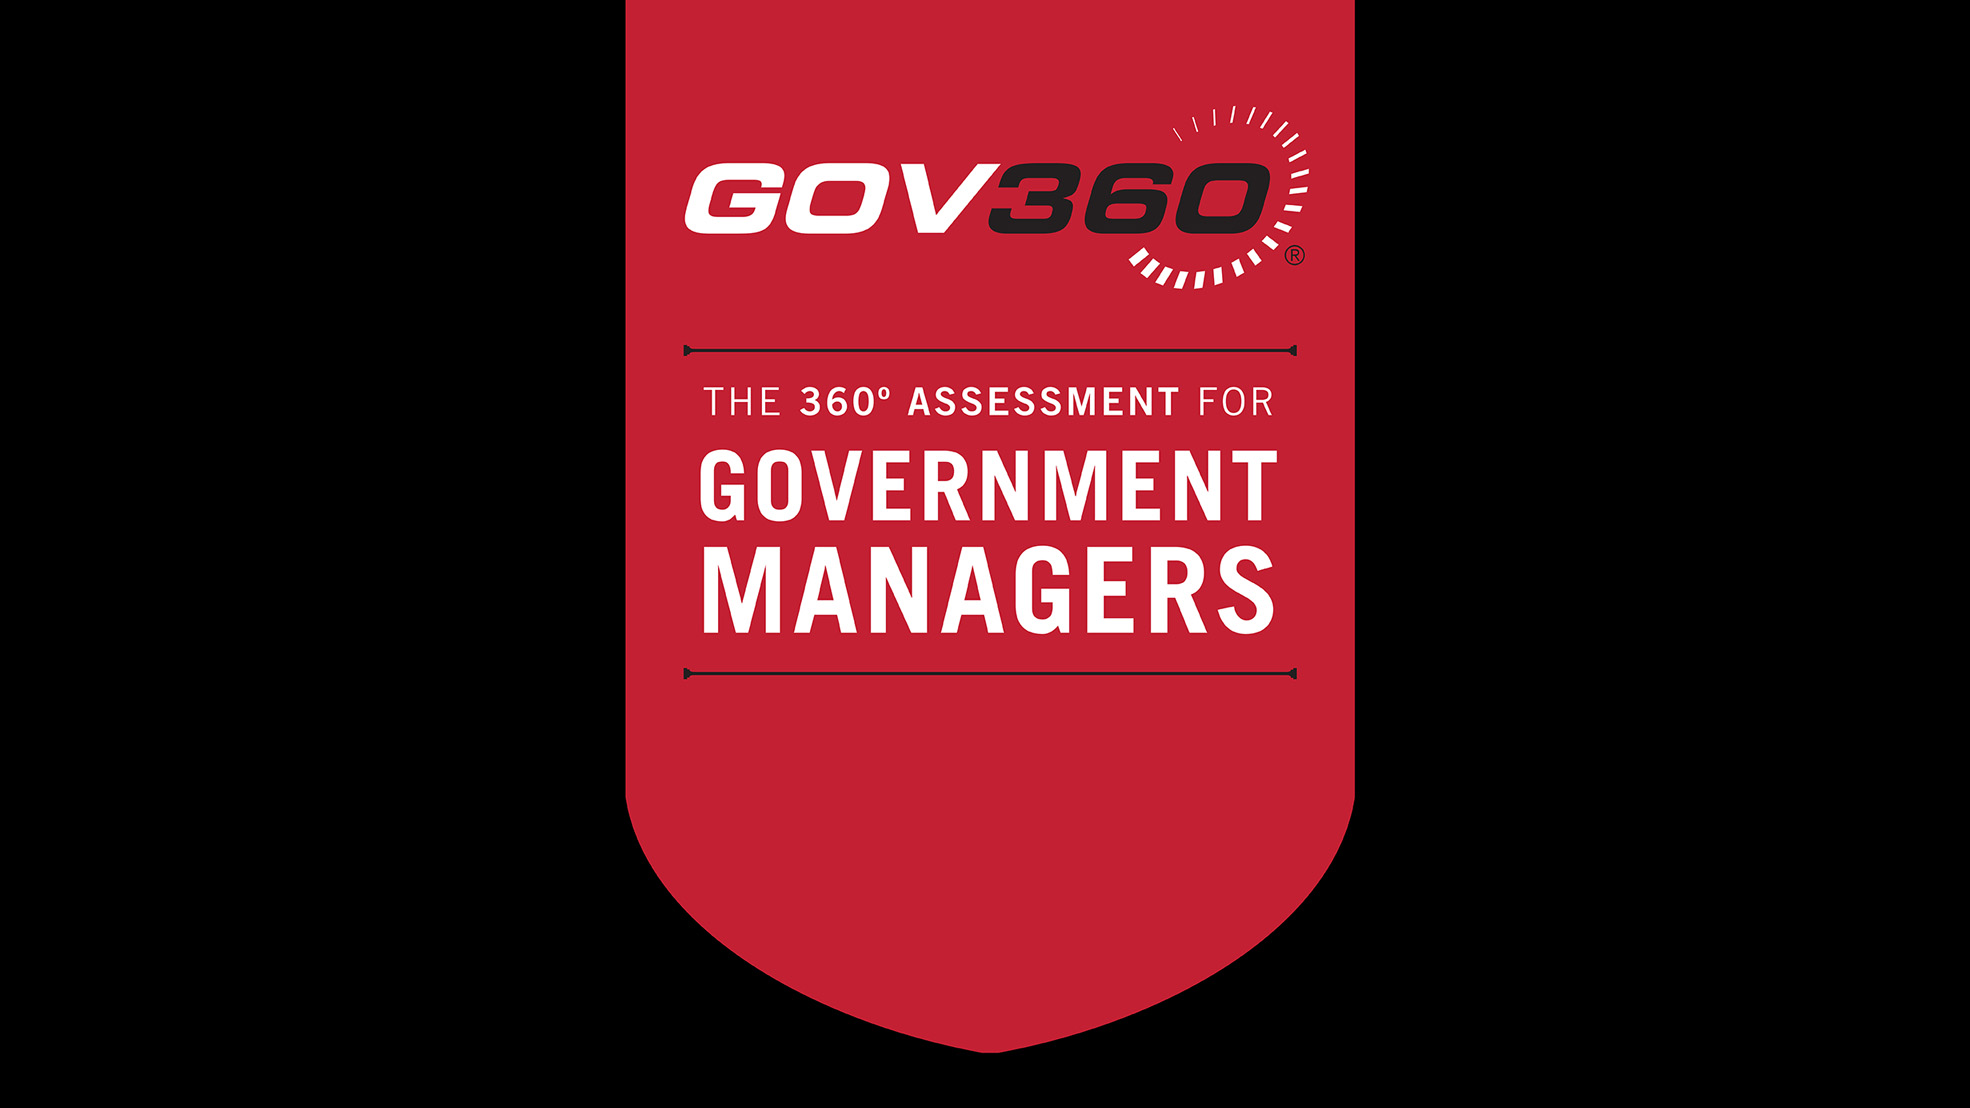 GOV360 The 360-degree assessment for government managers